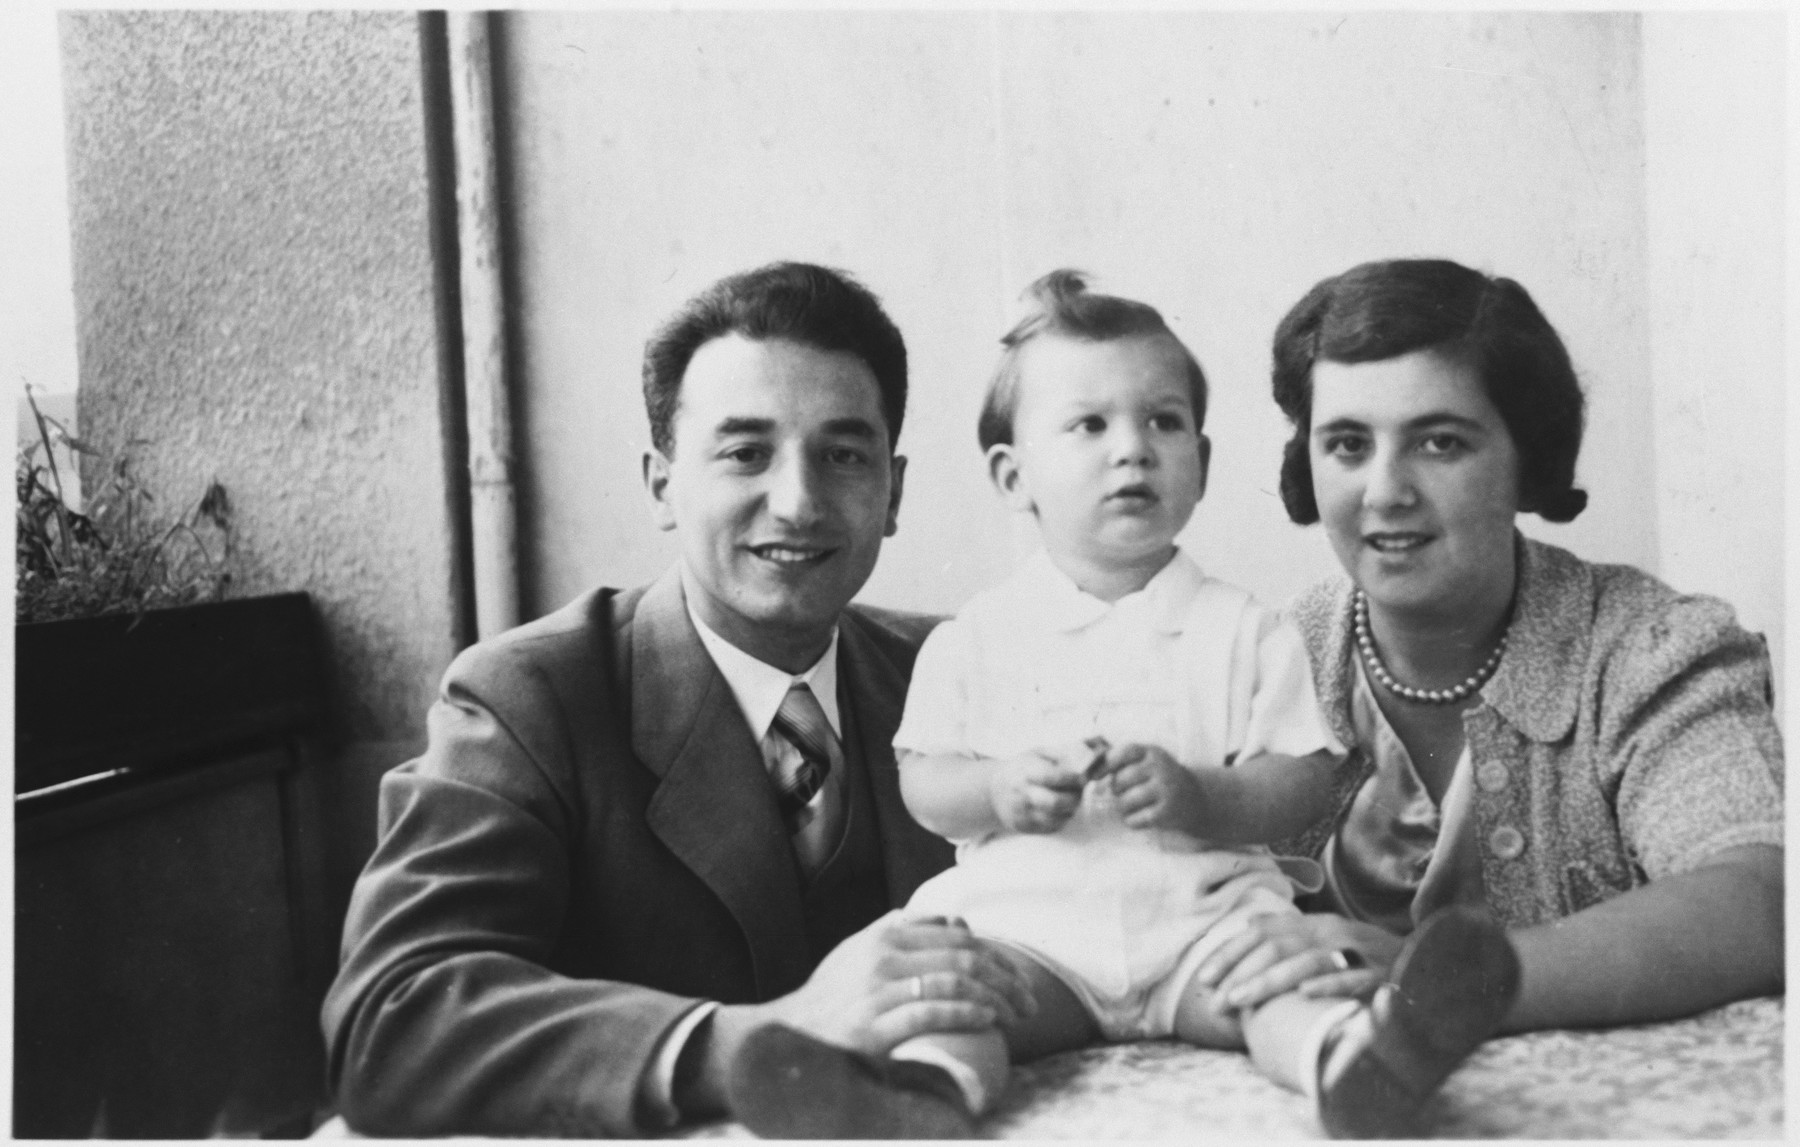 Portrait of the Hirsch family on board the refugee ship MS St. Louis.

Pictured are Max and Margot and their son, Joachim.  They disembarked in the Netherlands and later perished.